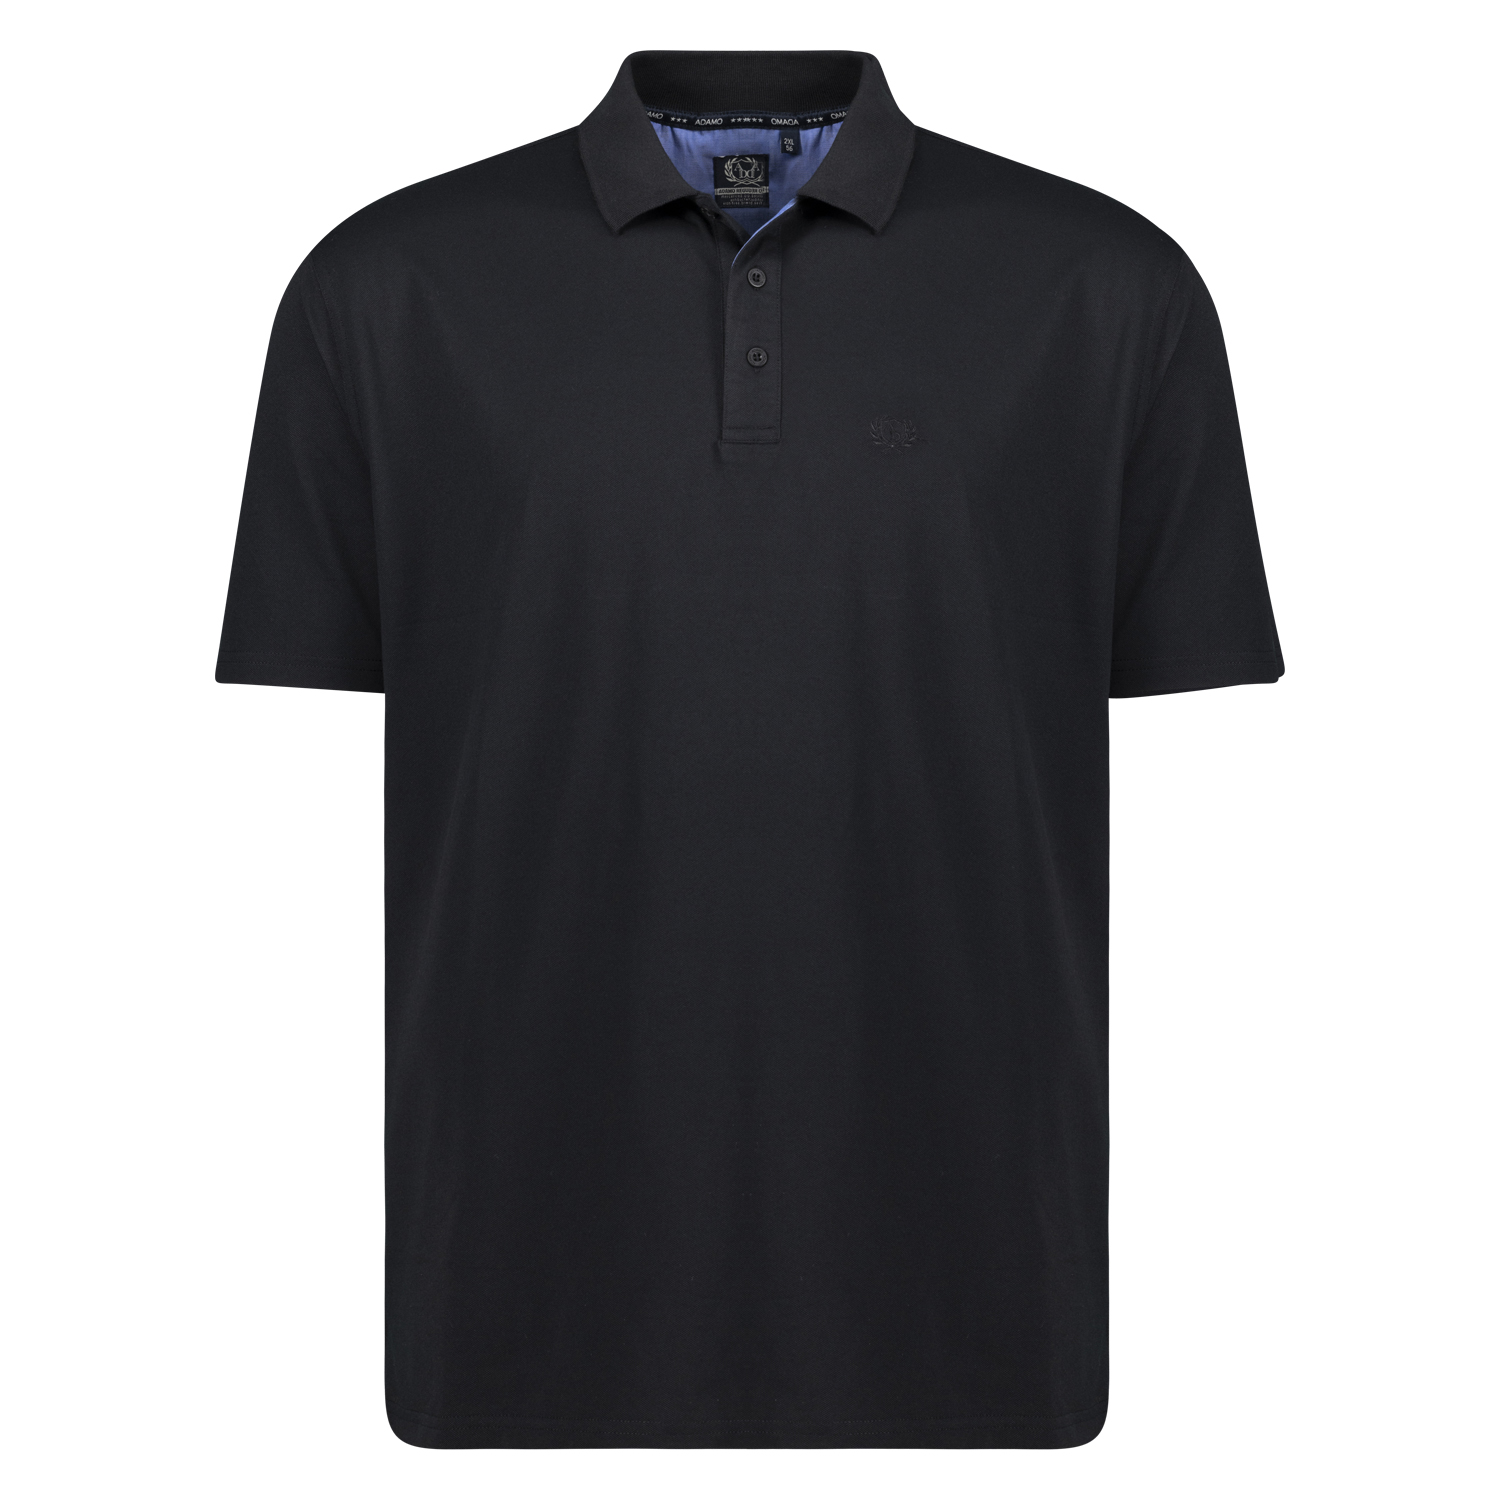 Black functional polo shirt for men by Adamo series "PEER" Tall Fit extra long in long sizes up to 5XLT